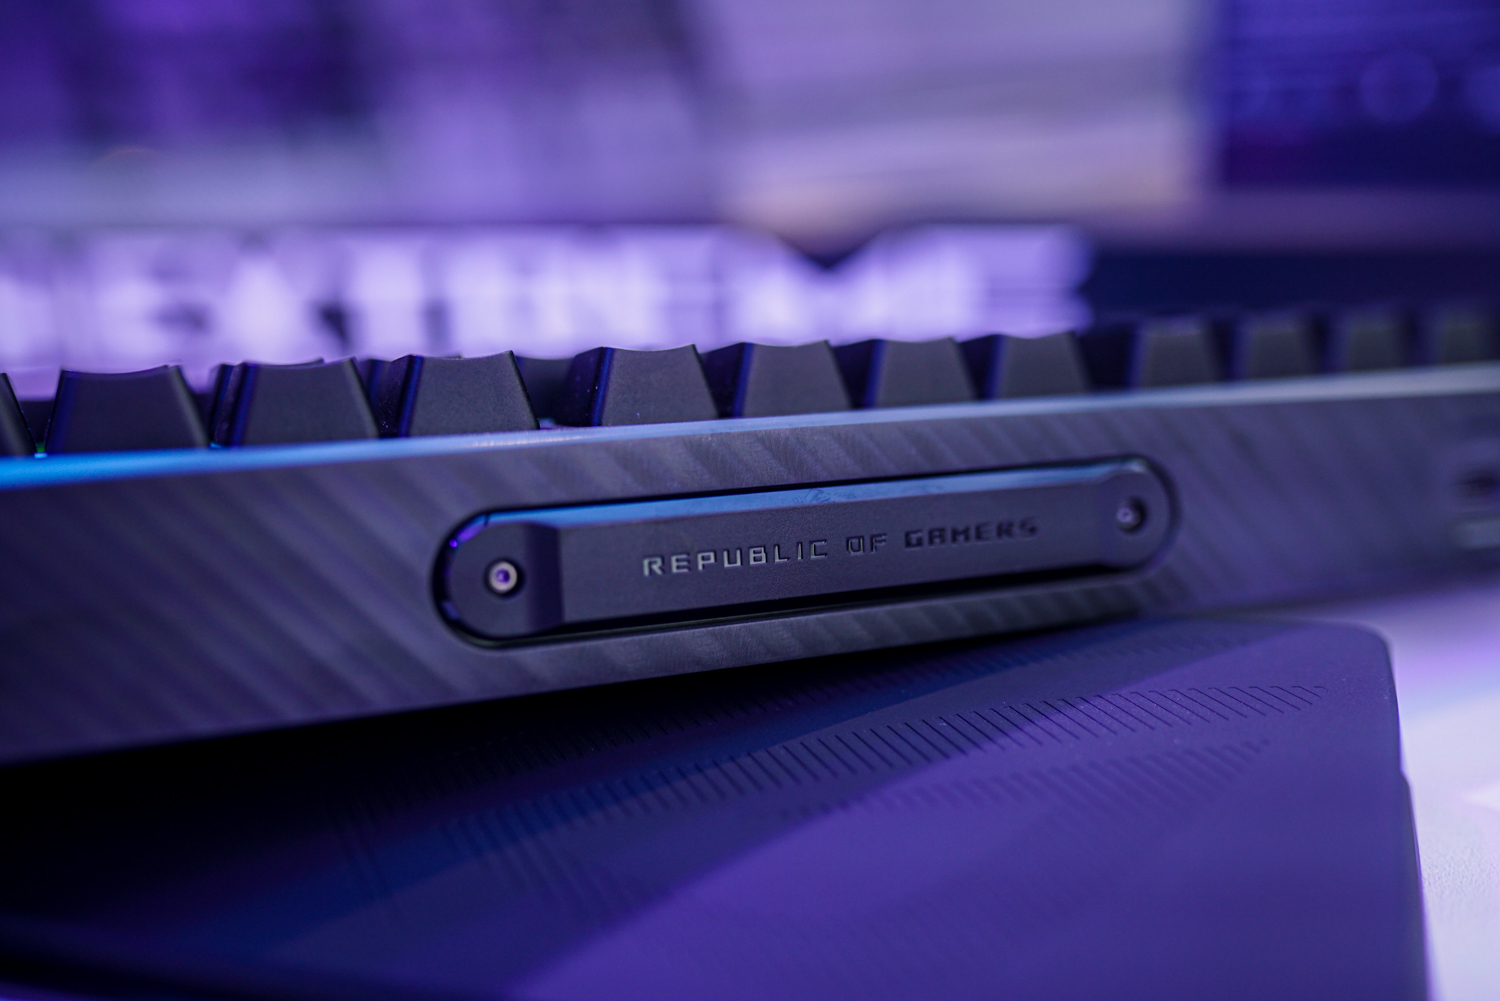 The Republic of Gamers badge on the Asus ROG Azoth Extreme keyboard.